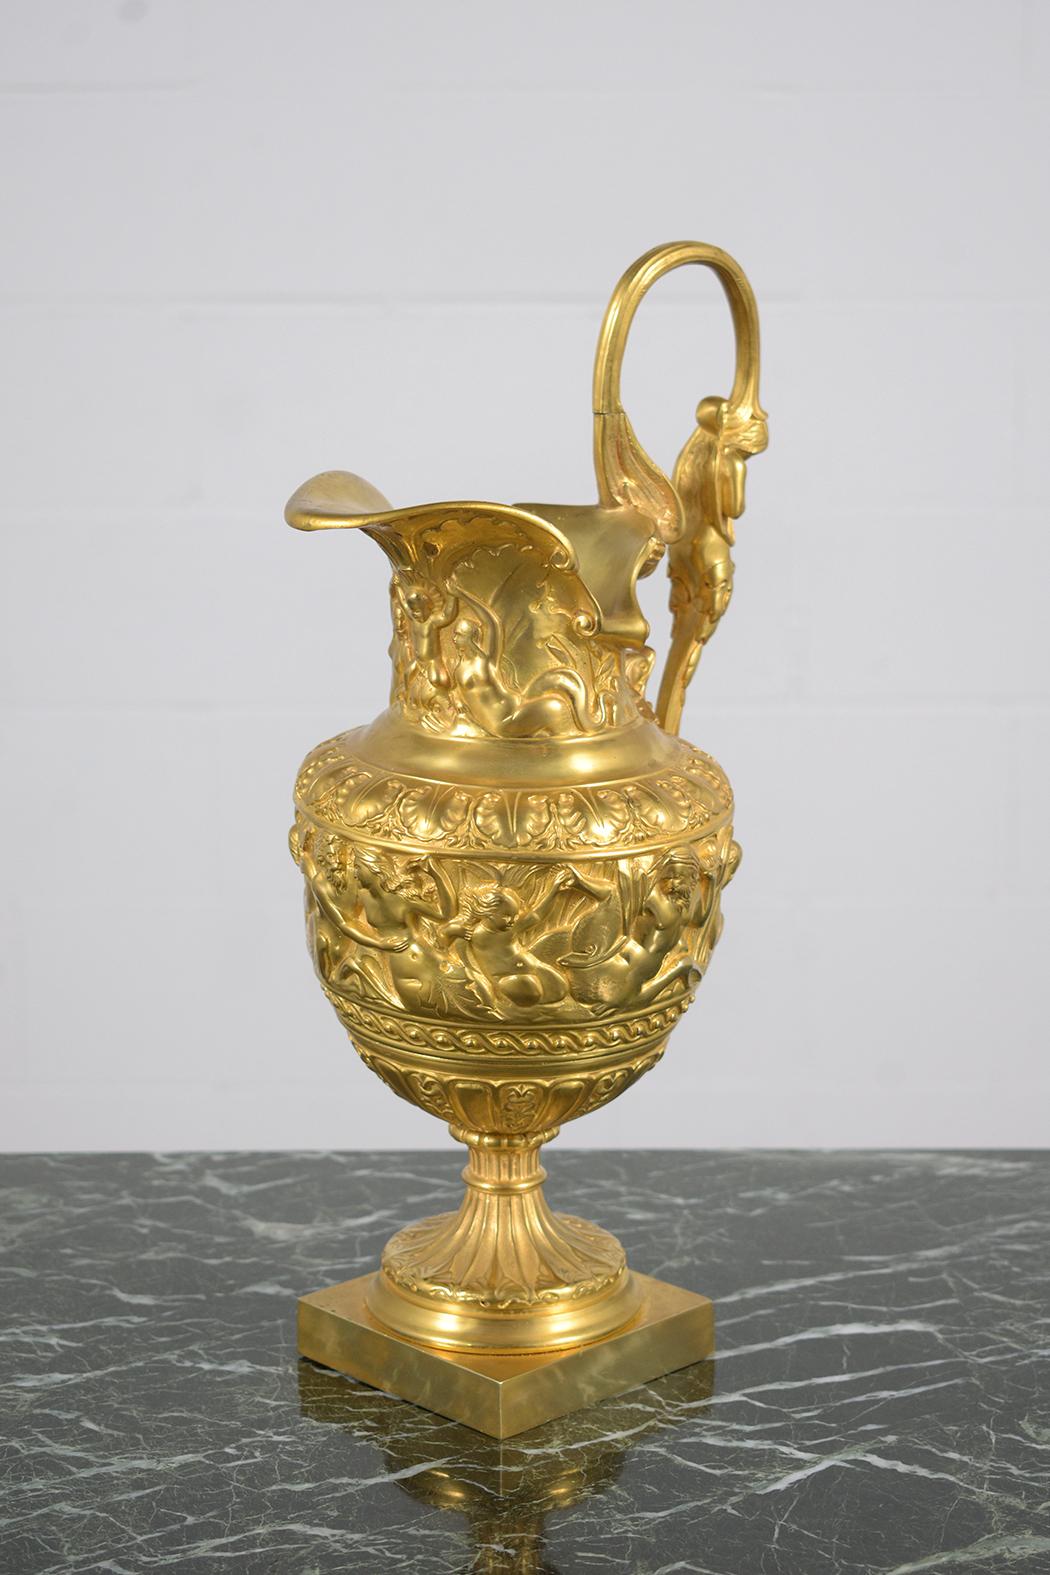 Elevate your space with this extraordinary antique French urn, preserved in excellent condition. Expertly crafted from bronze in the early 1900s, this unique piece features intricate carving motifs throughout, showcasing exquisite detail and